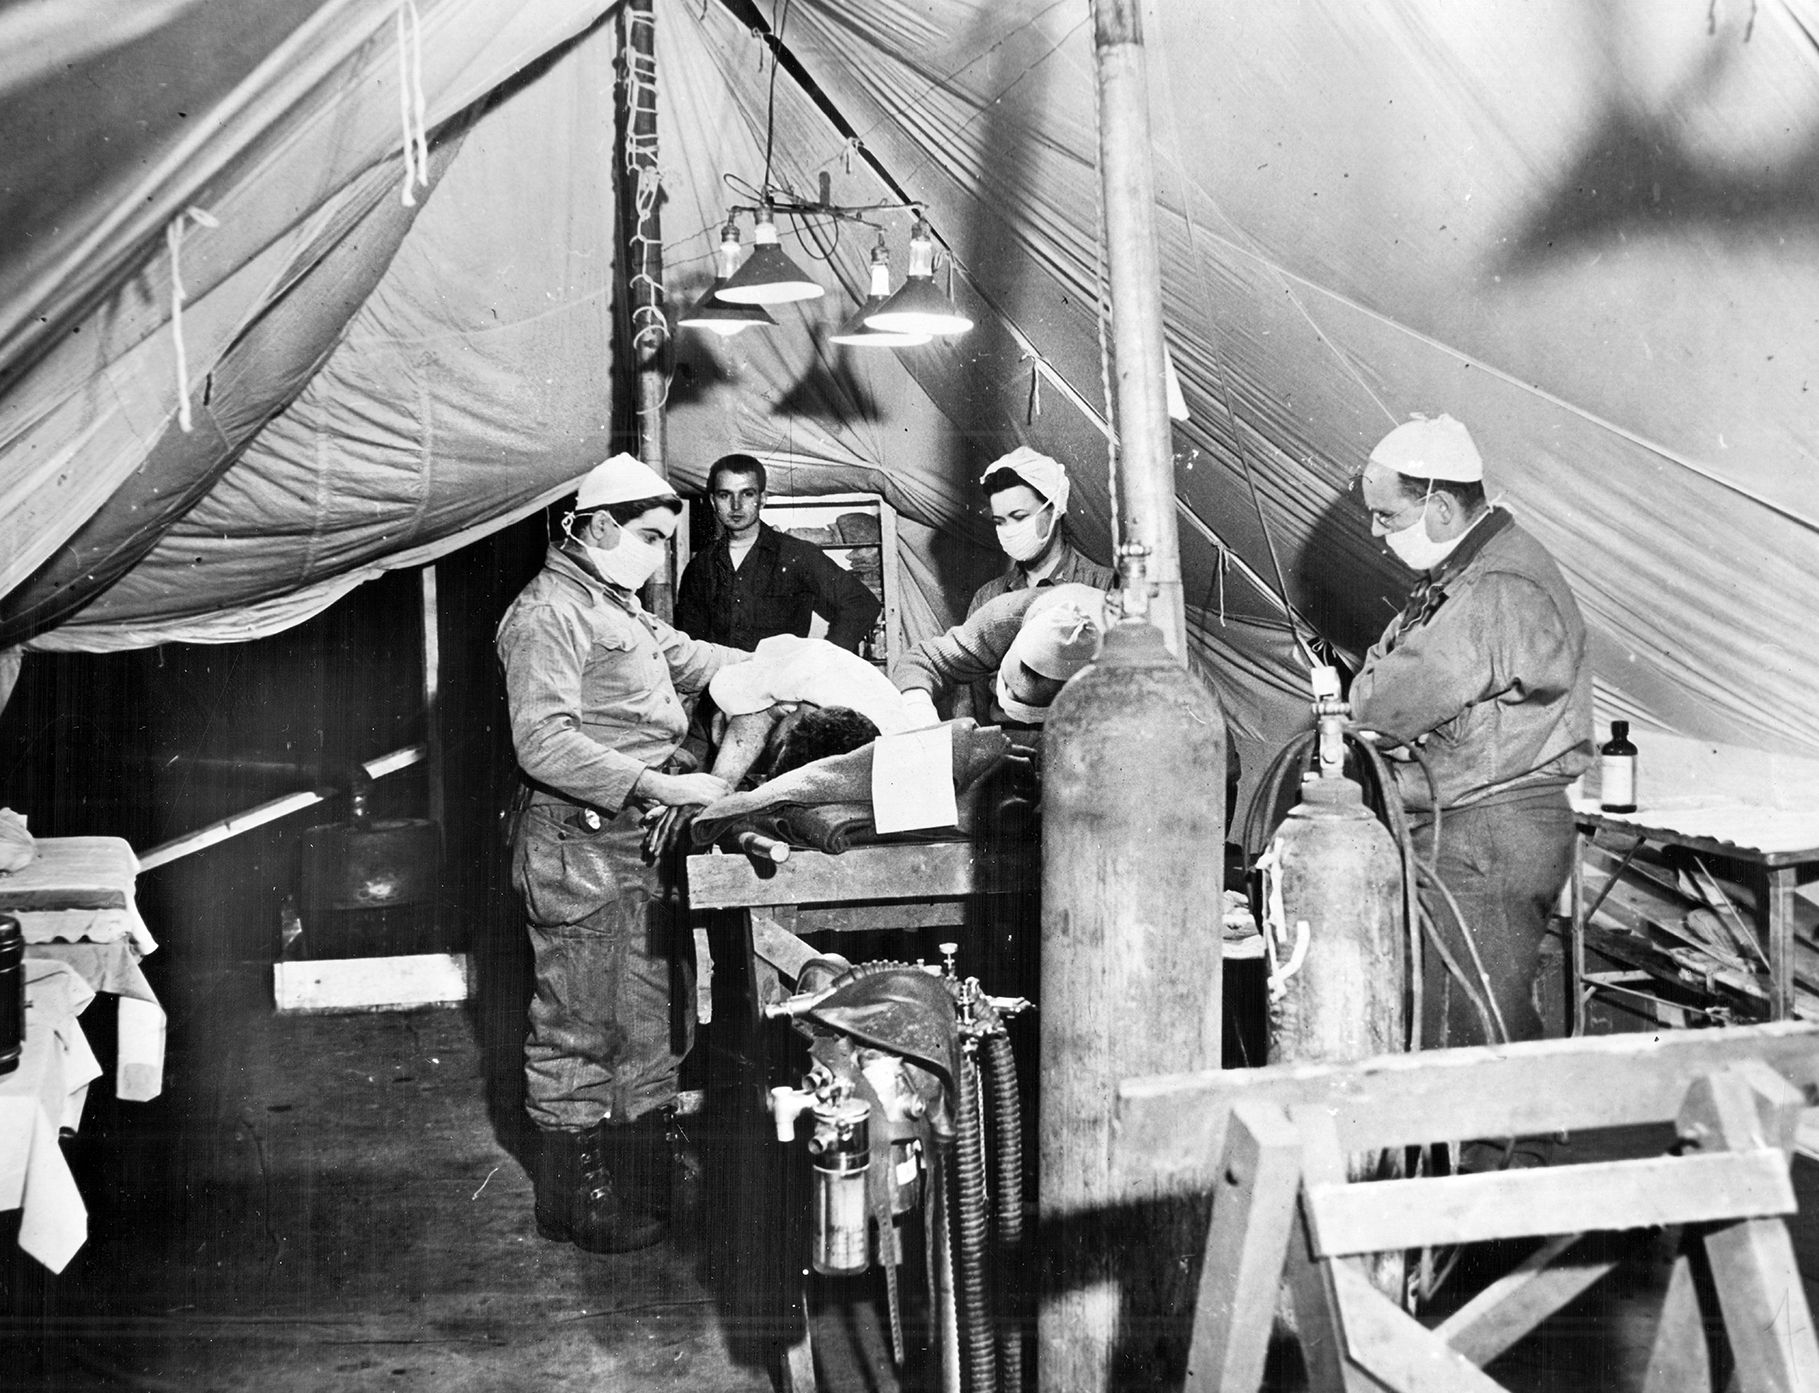 Two doctors, a nurse, and other personnel operate on a wounded GI at a field hospital during the Battle of the Bulge. Such surgery so close to the combat areas often meant the difference between life and death for seriously injured soldiers.